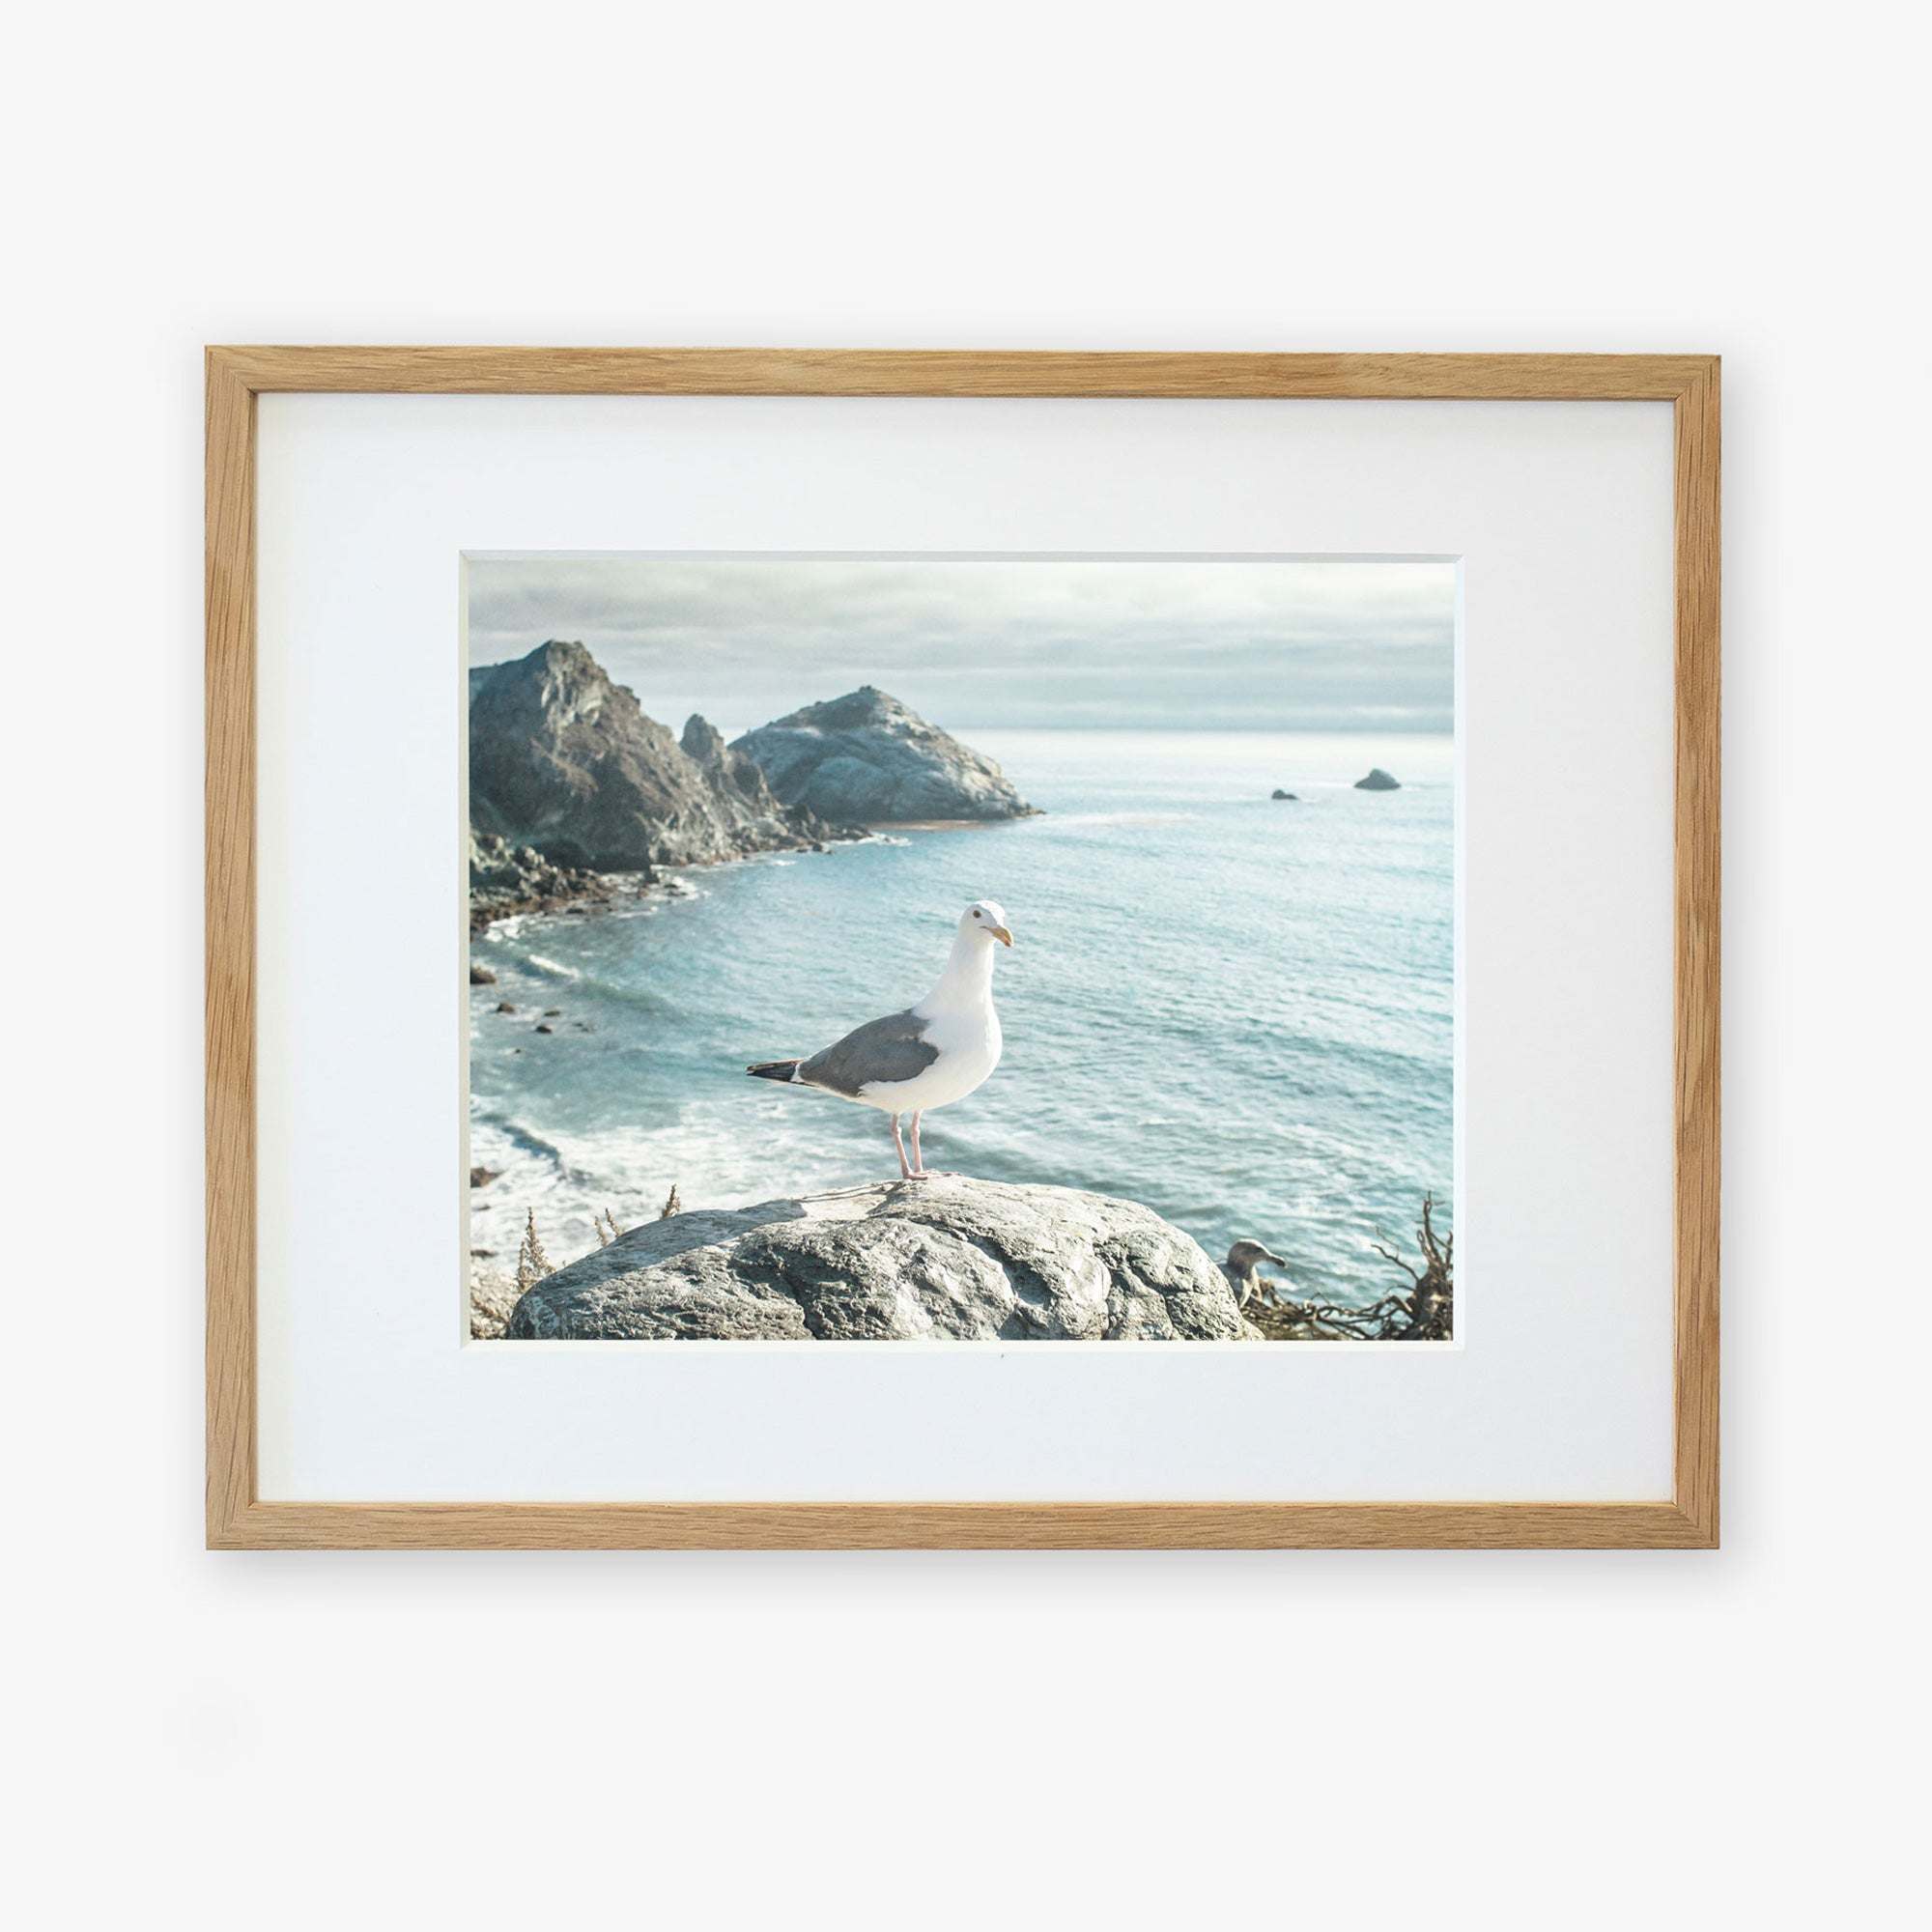 A Big Sur coastal seagull print depicting a seagull standing on a rocky cliff with ocean waves and distant rocky islands in the background, printed on archival photographic paper and hung on a white wall - Offley Green's Big Sur Landscape Print, 'Lobster Mornay For Tea'.